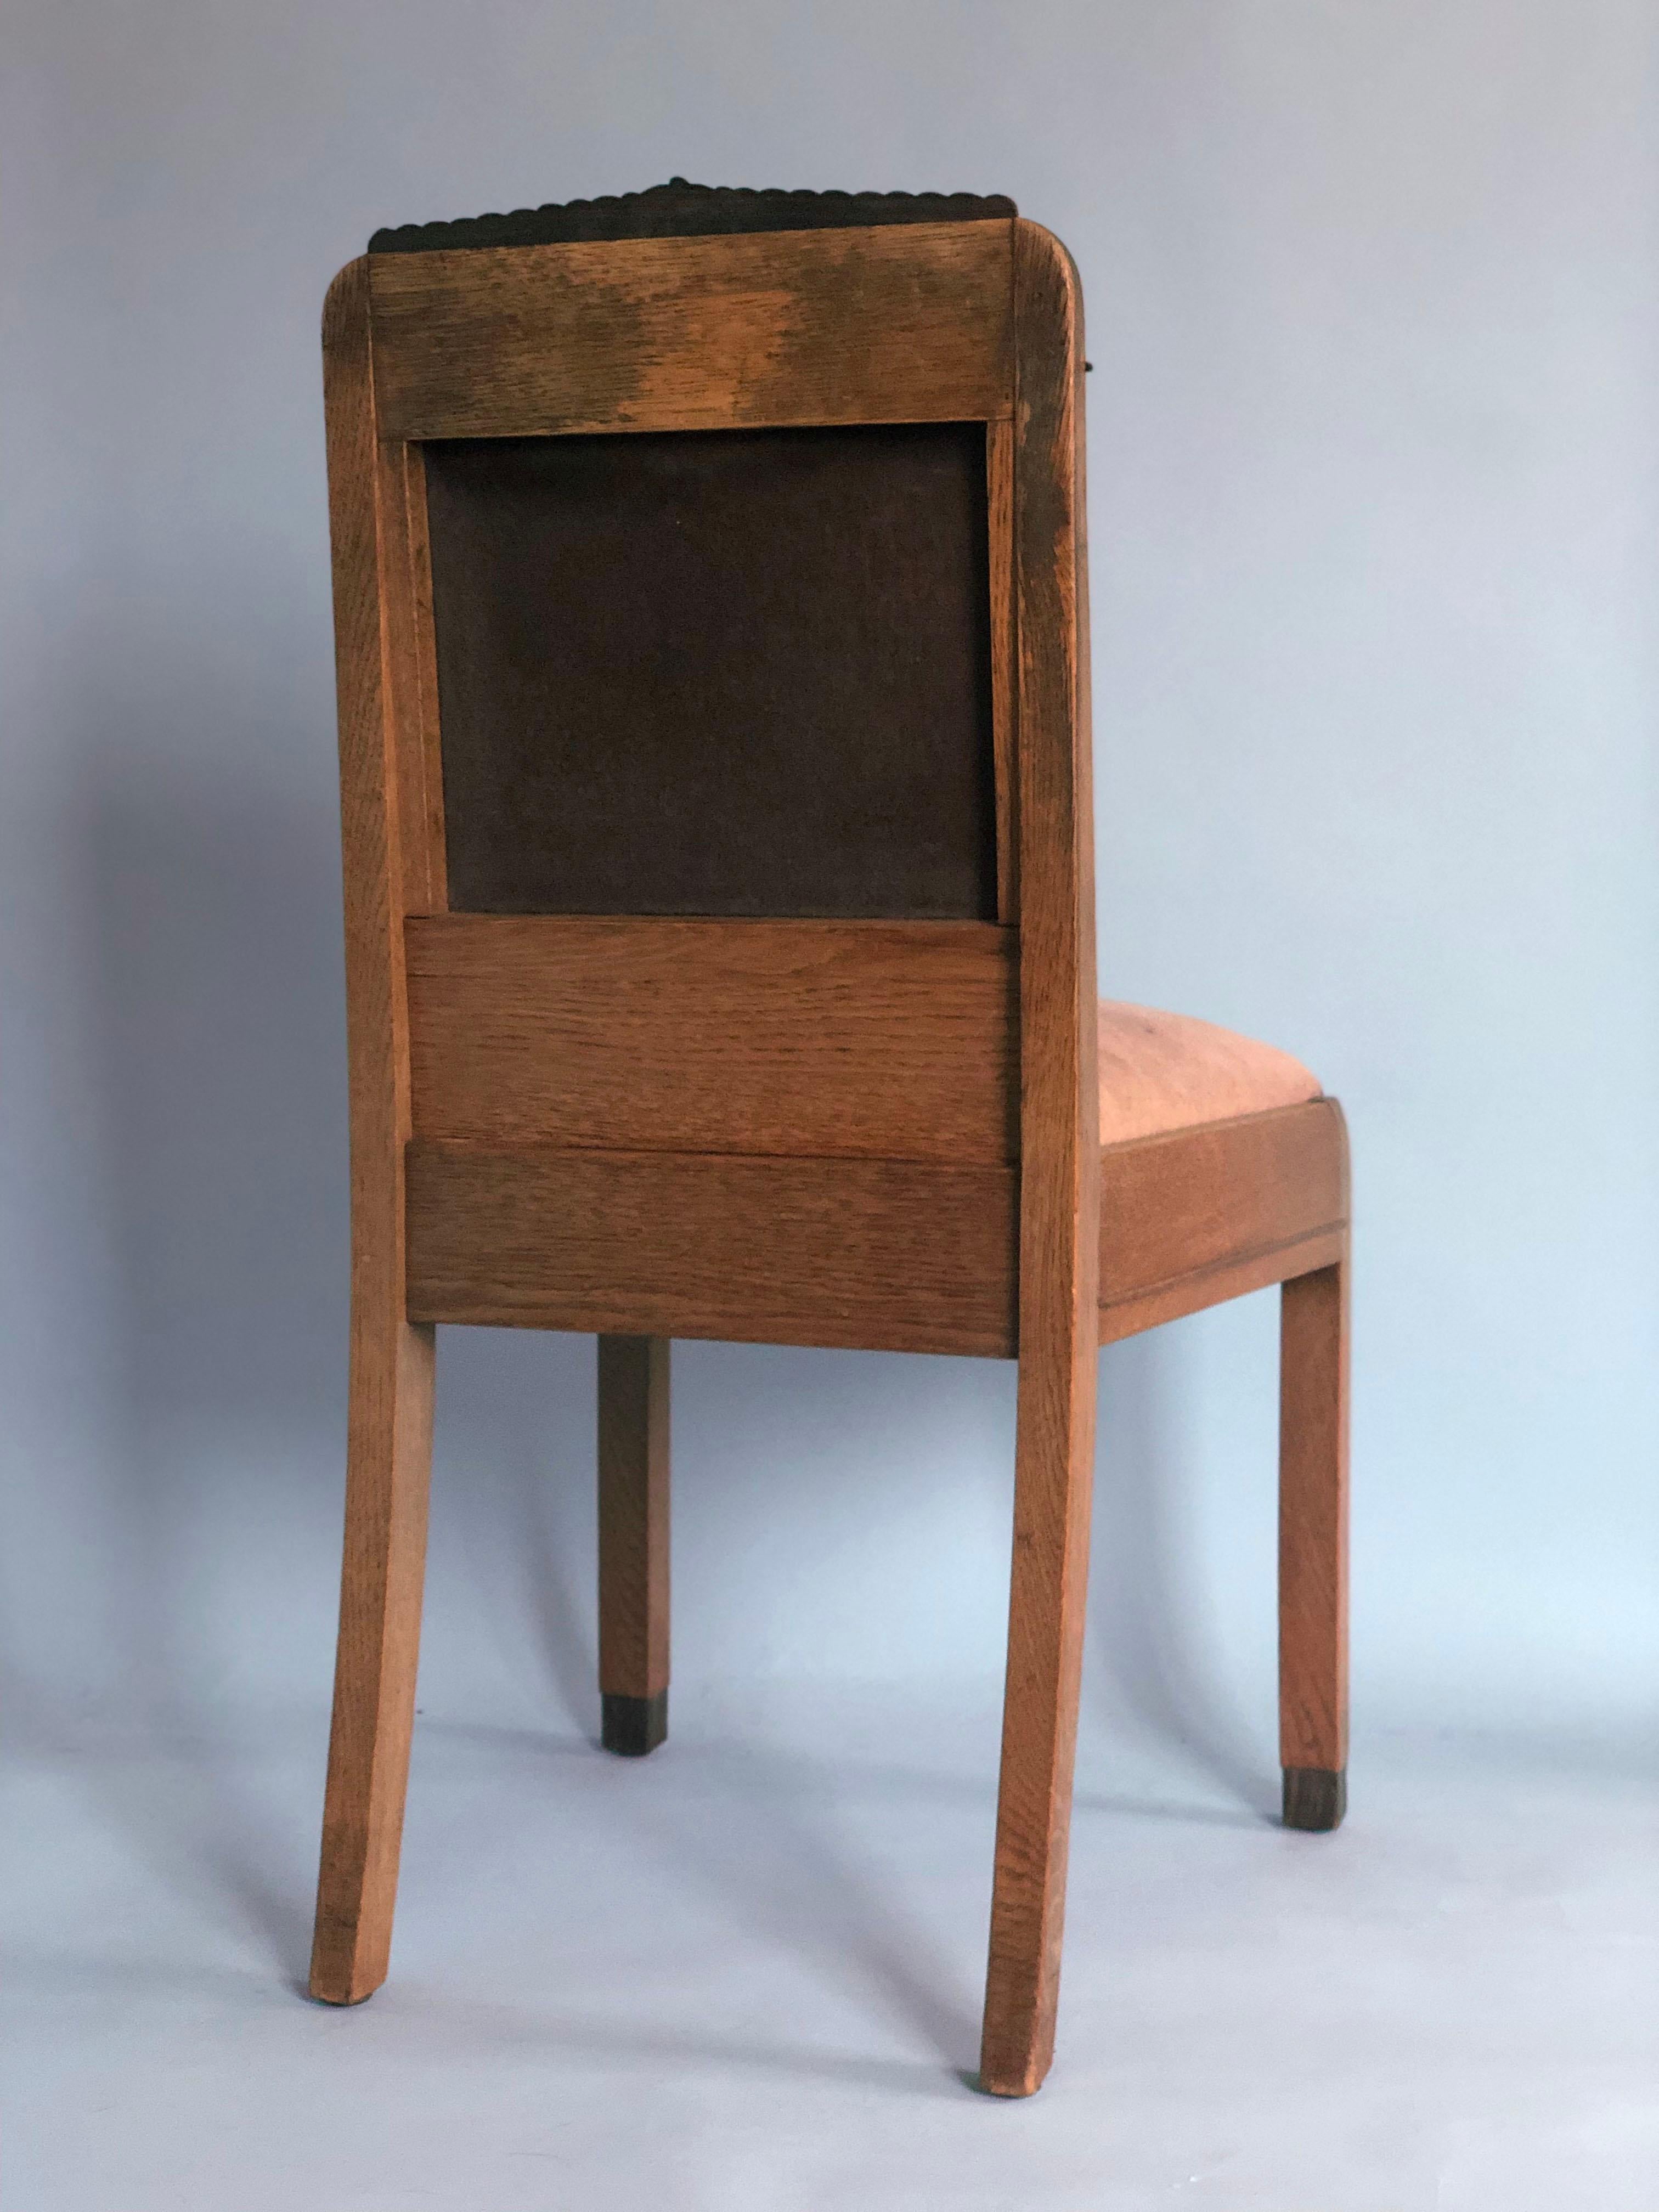 A richly detailed oak Amsterdam School chair from the early 1920s, the Netherlands. A chic look from the Art Deco period with slightly curved oak sides. This chair has a coromandel ornament at the top and accents on the side and on 2 legs at the